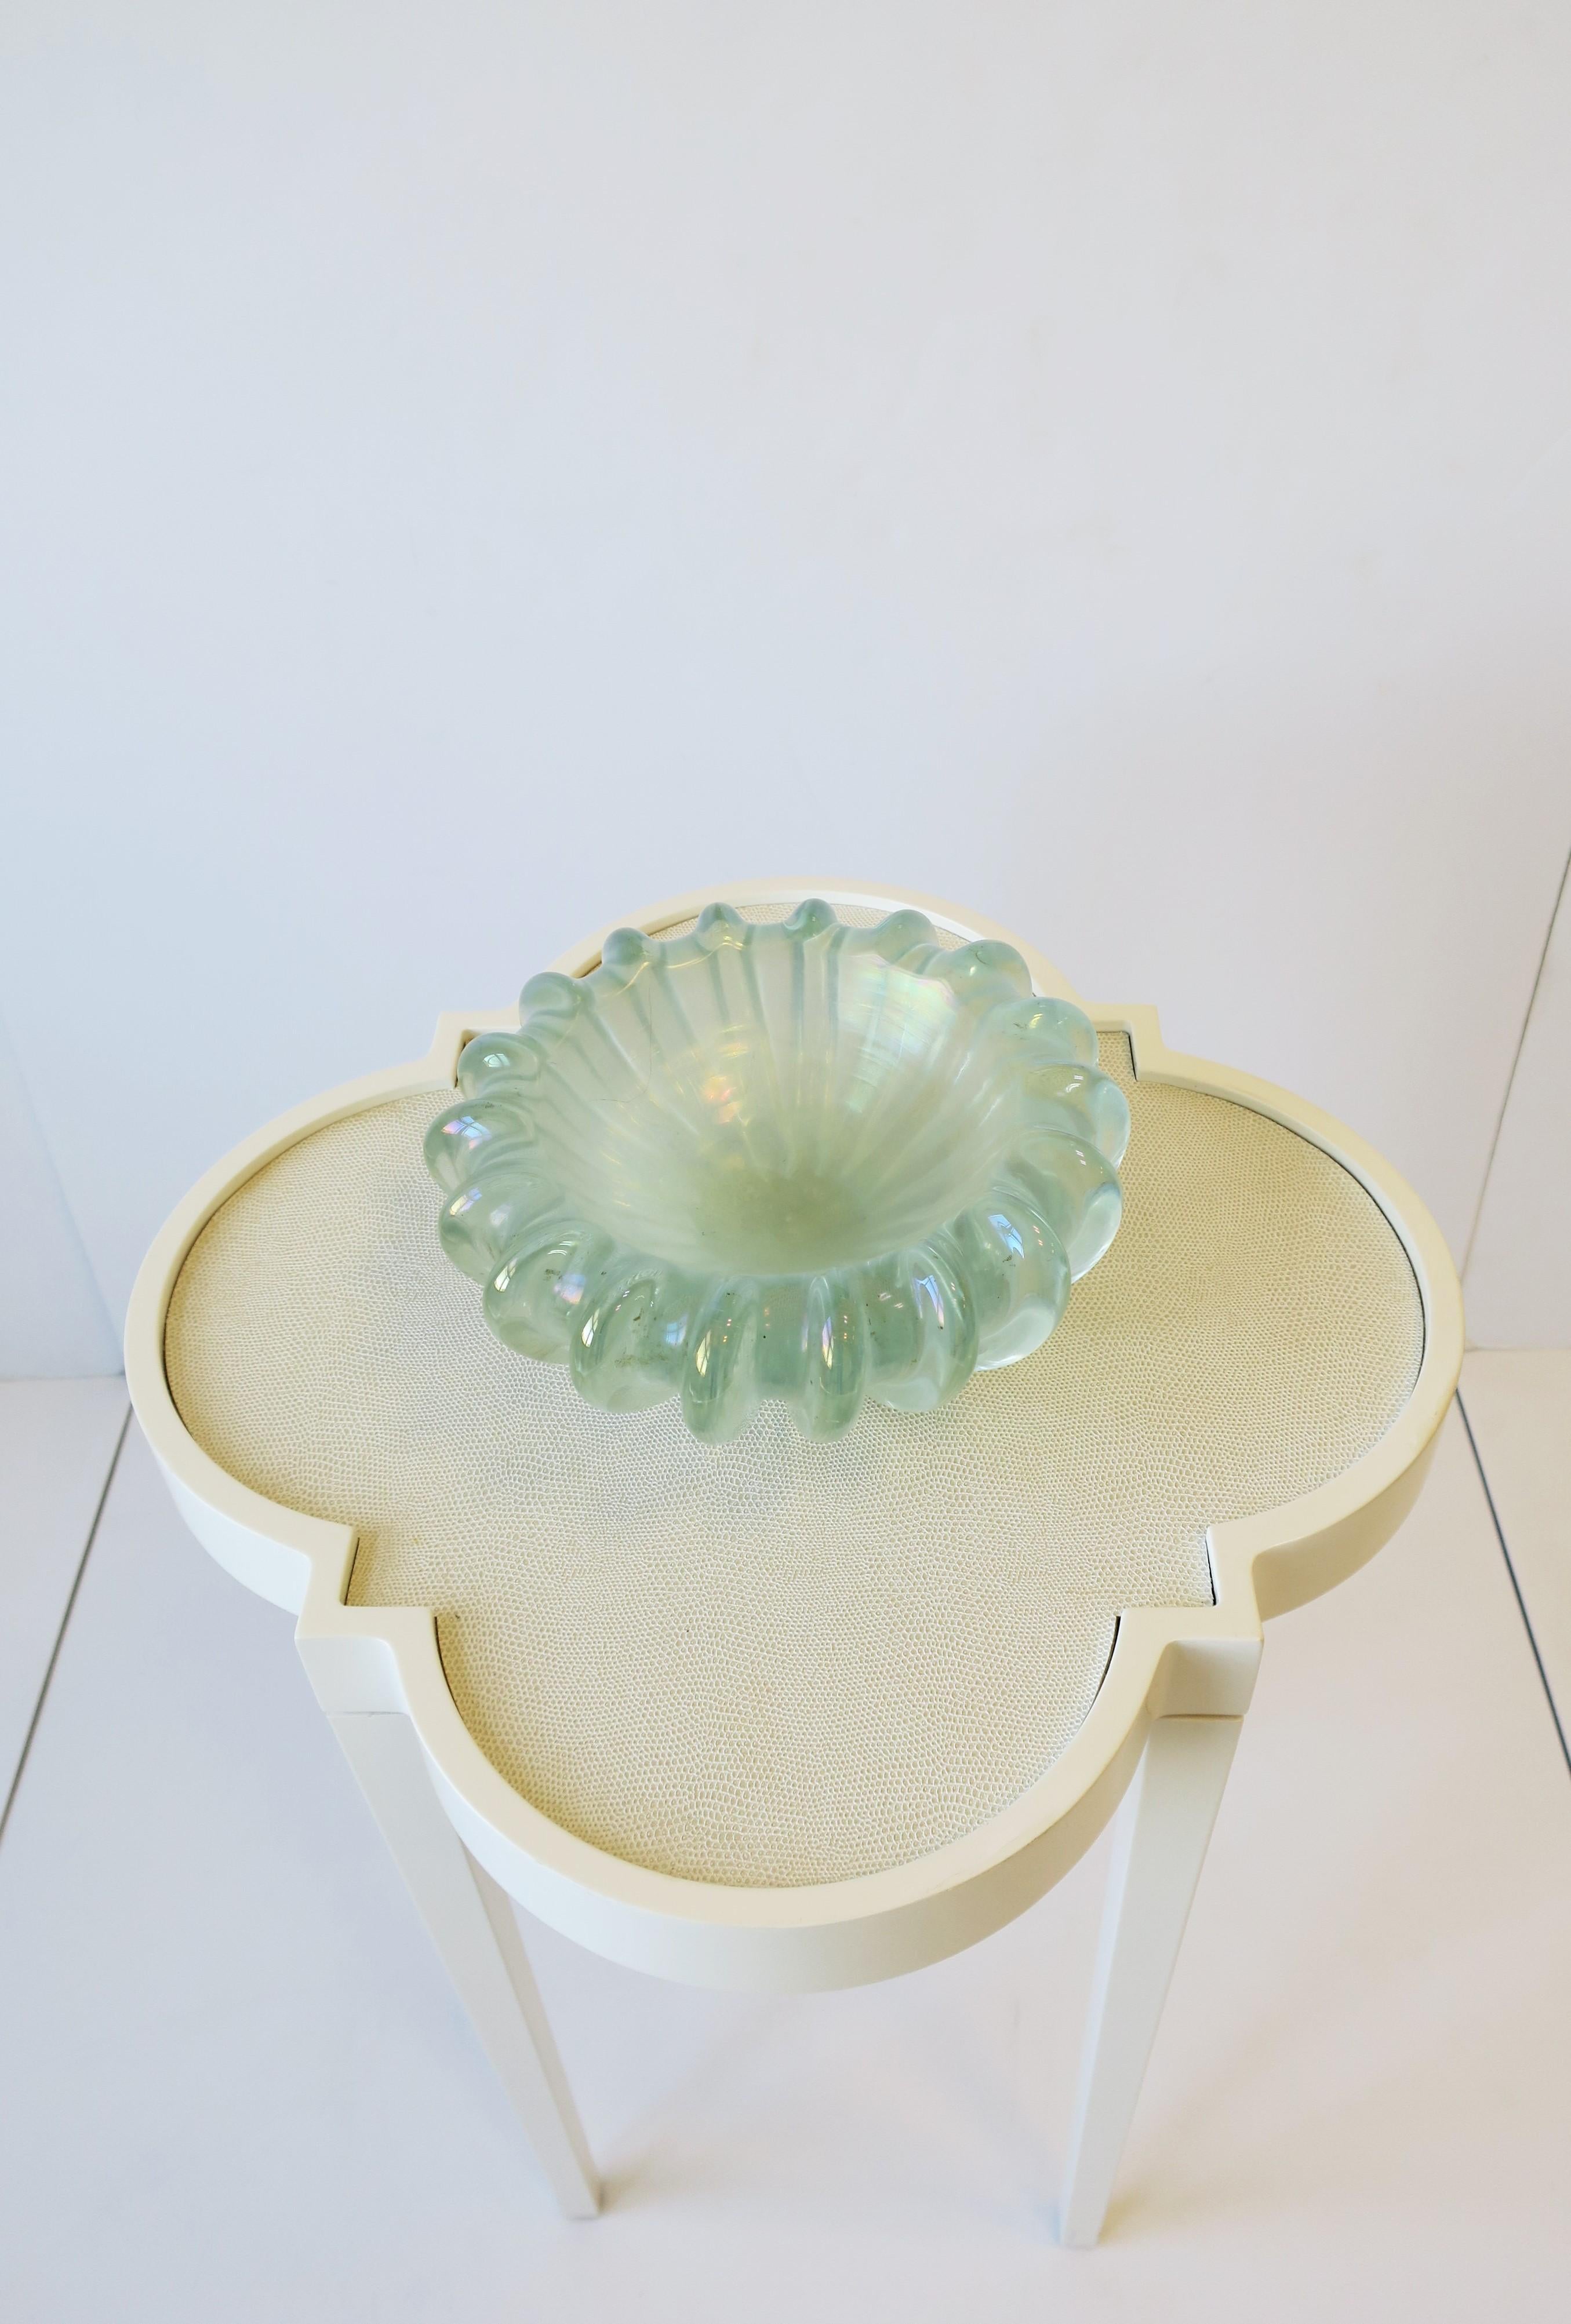 Italian Murano Art Glass Bowl with Iridescent Hue and Fluted Design For Sale 6